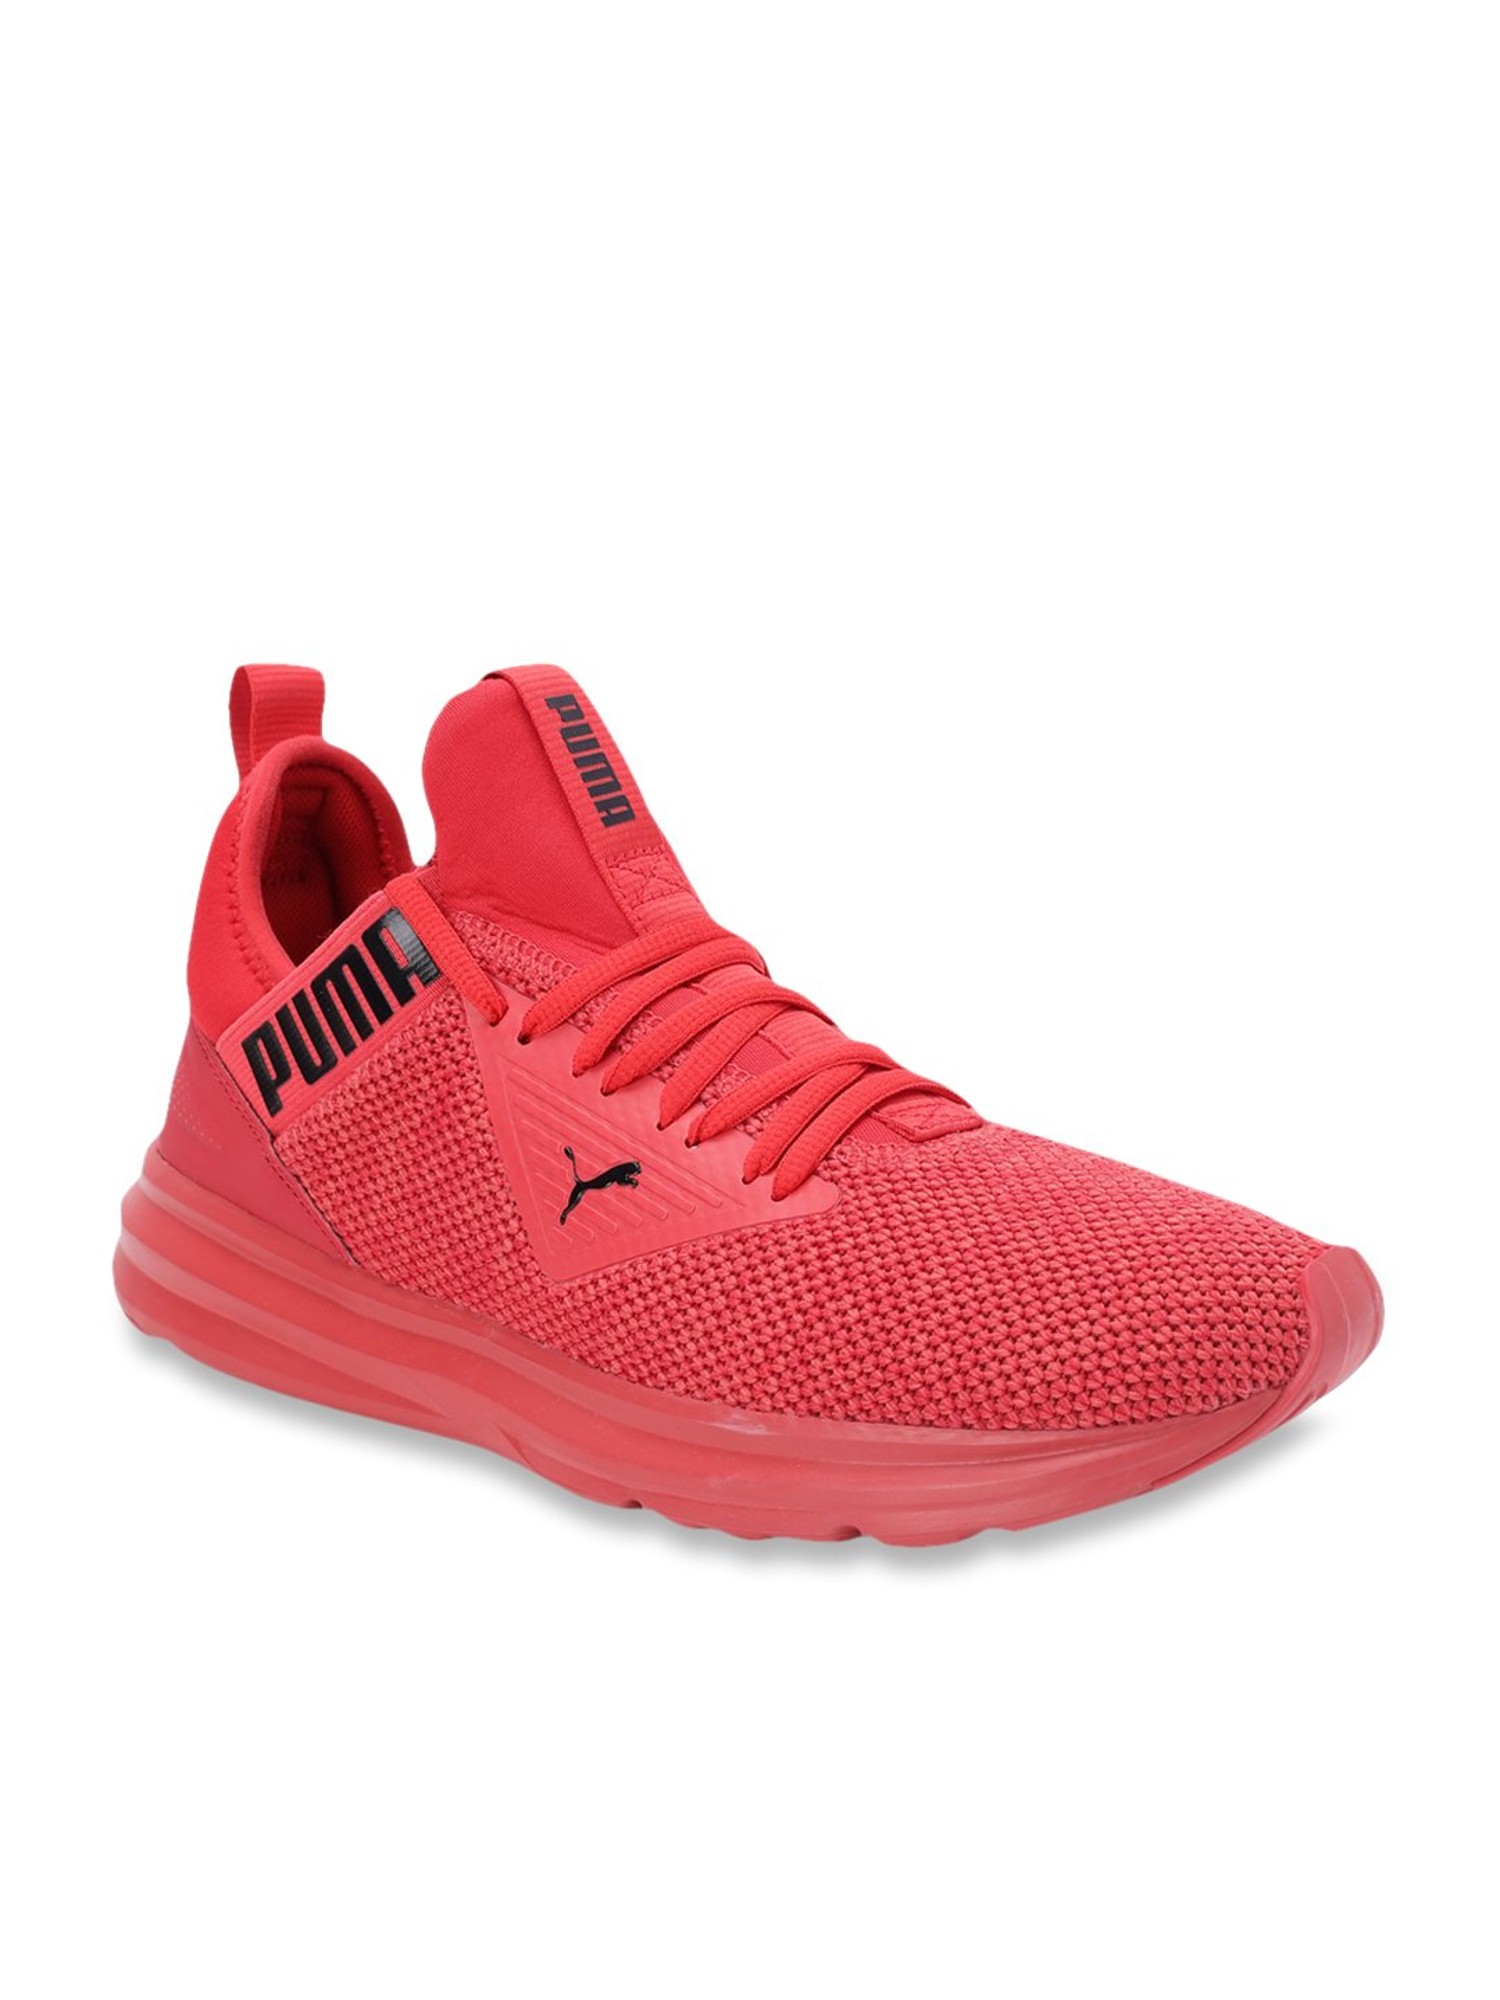 Enzo Beta High Risk Red Running Shoes 